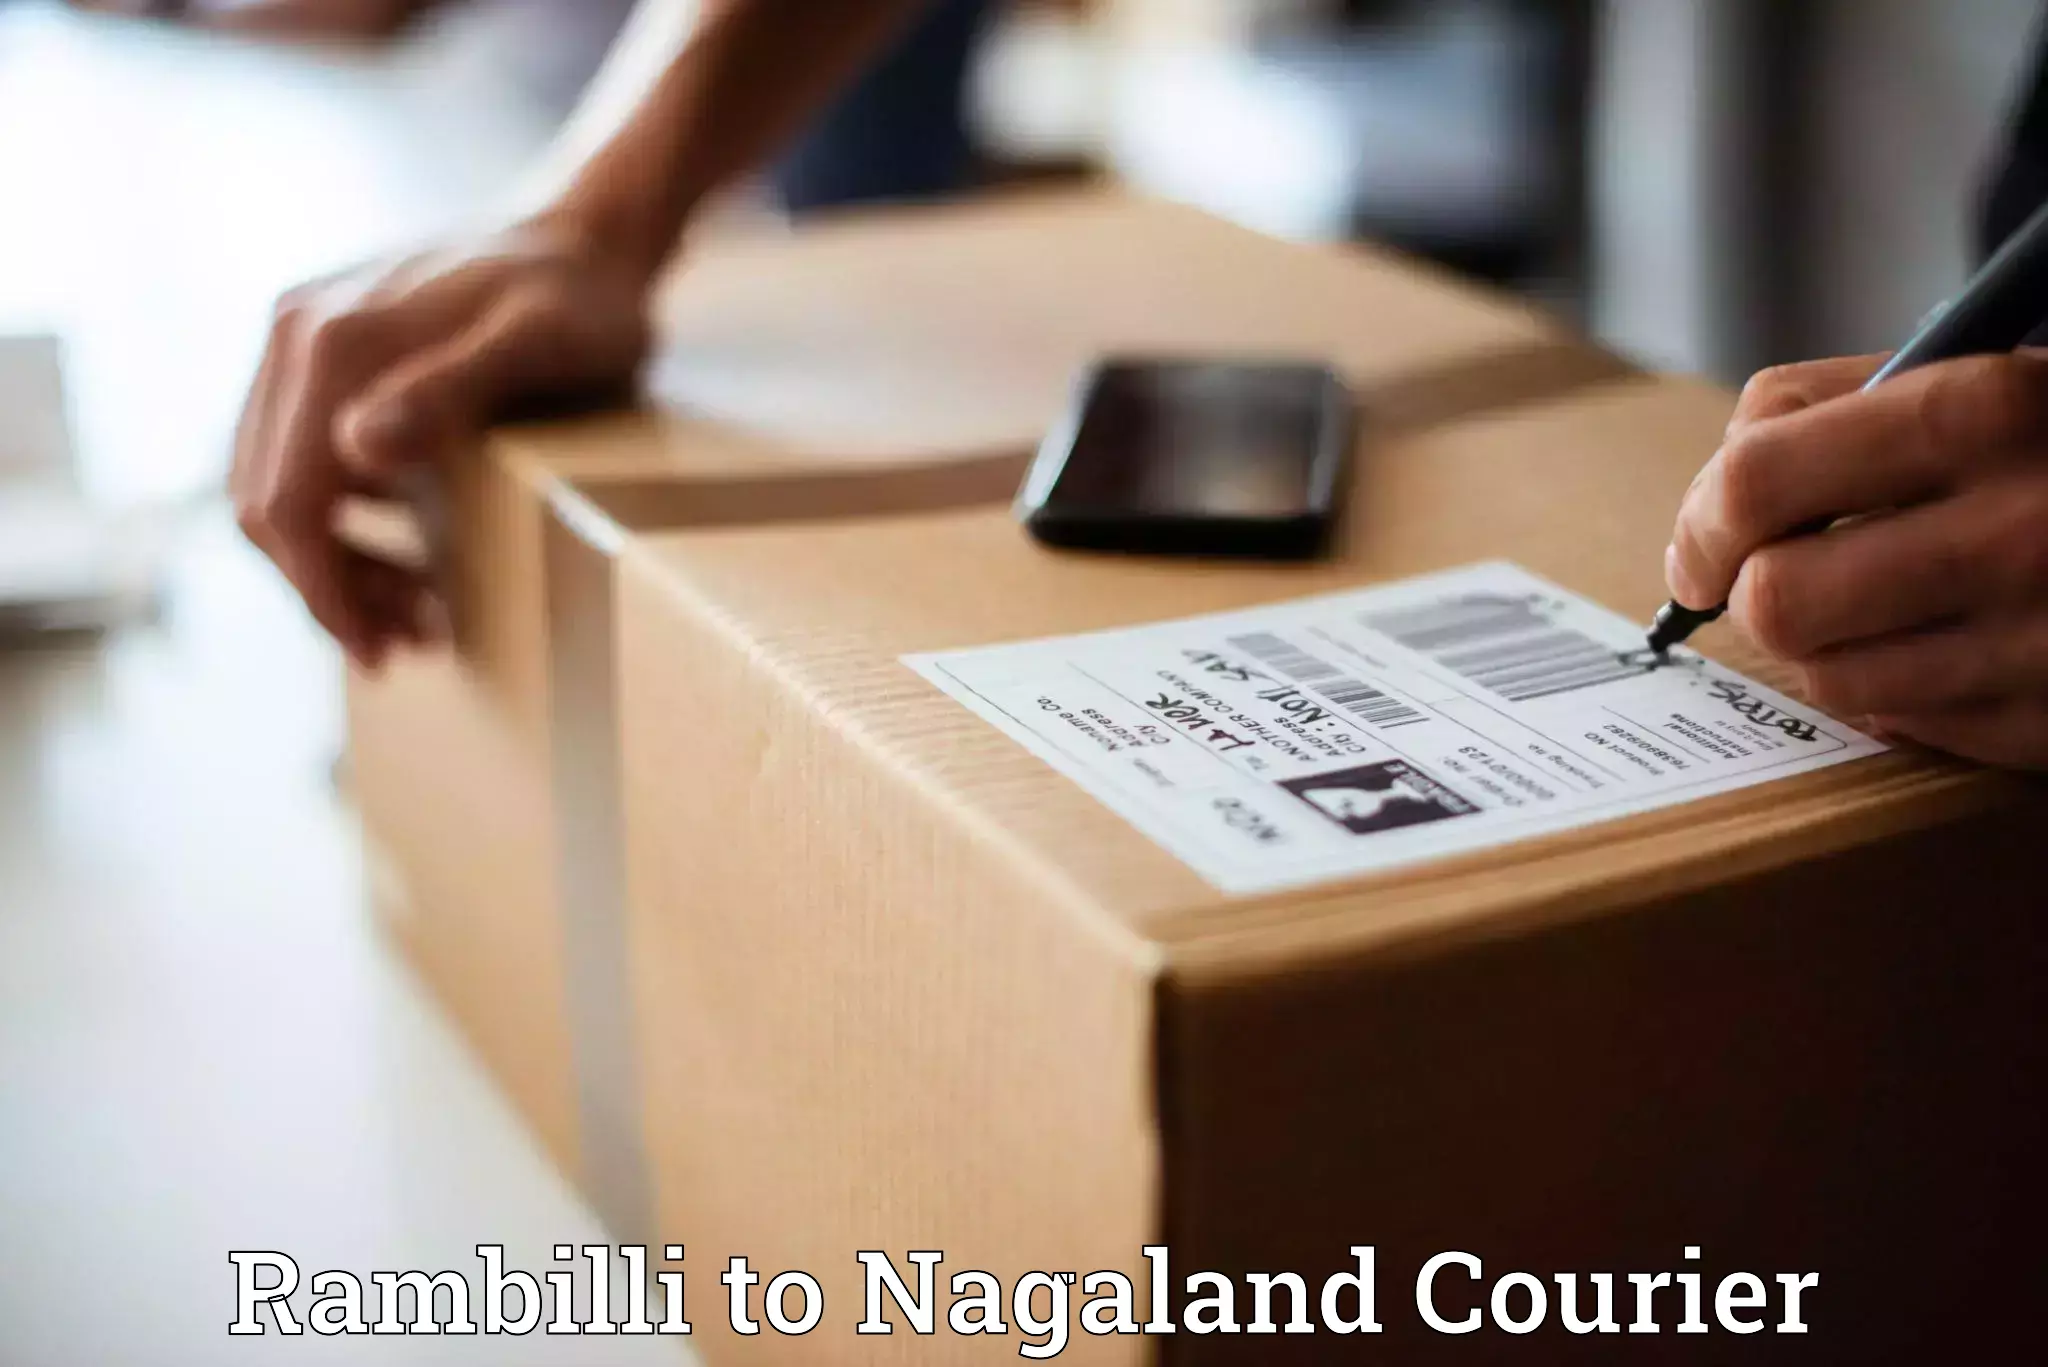 Pharmaceutical courier Rambilli to Nagaland